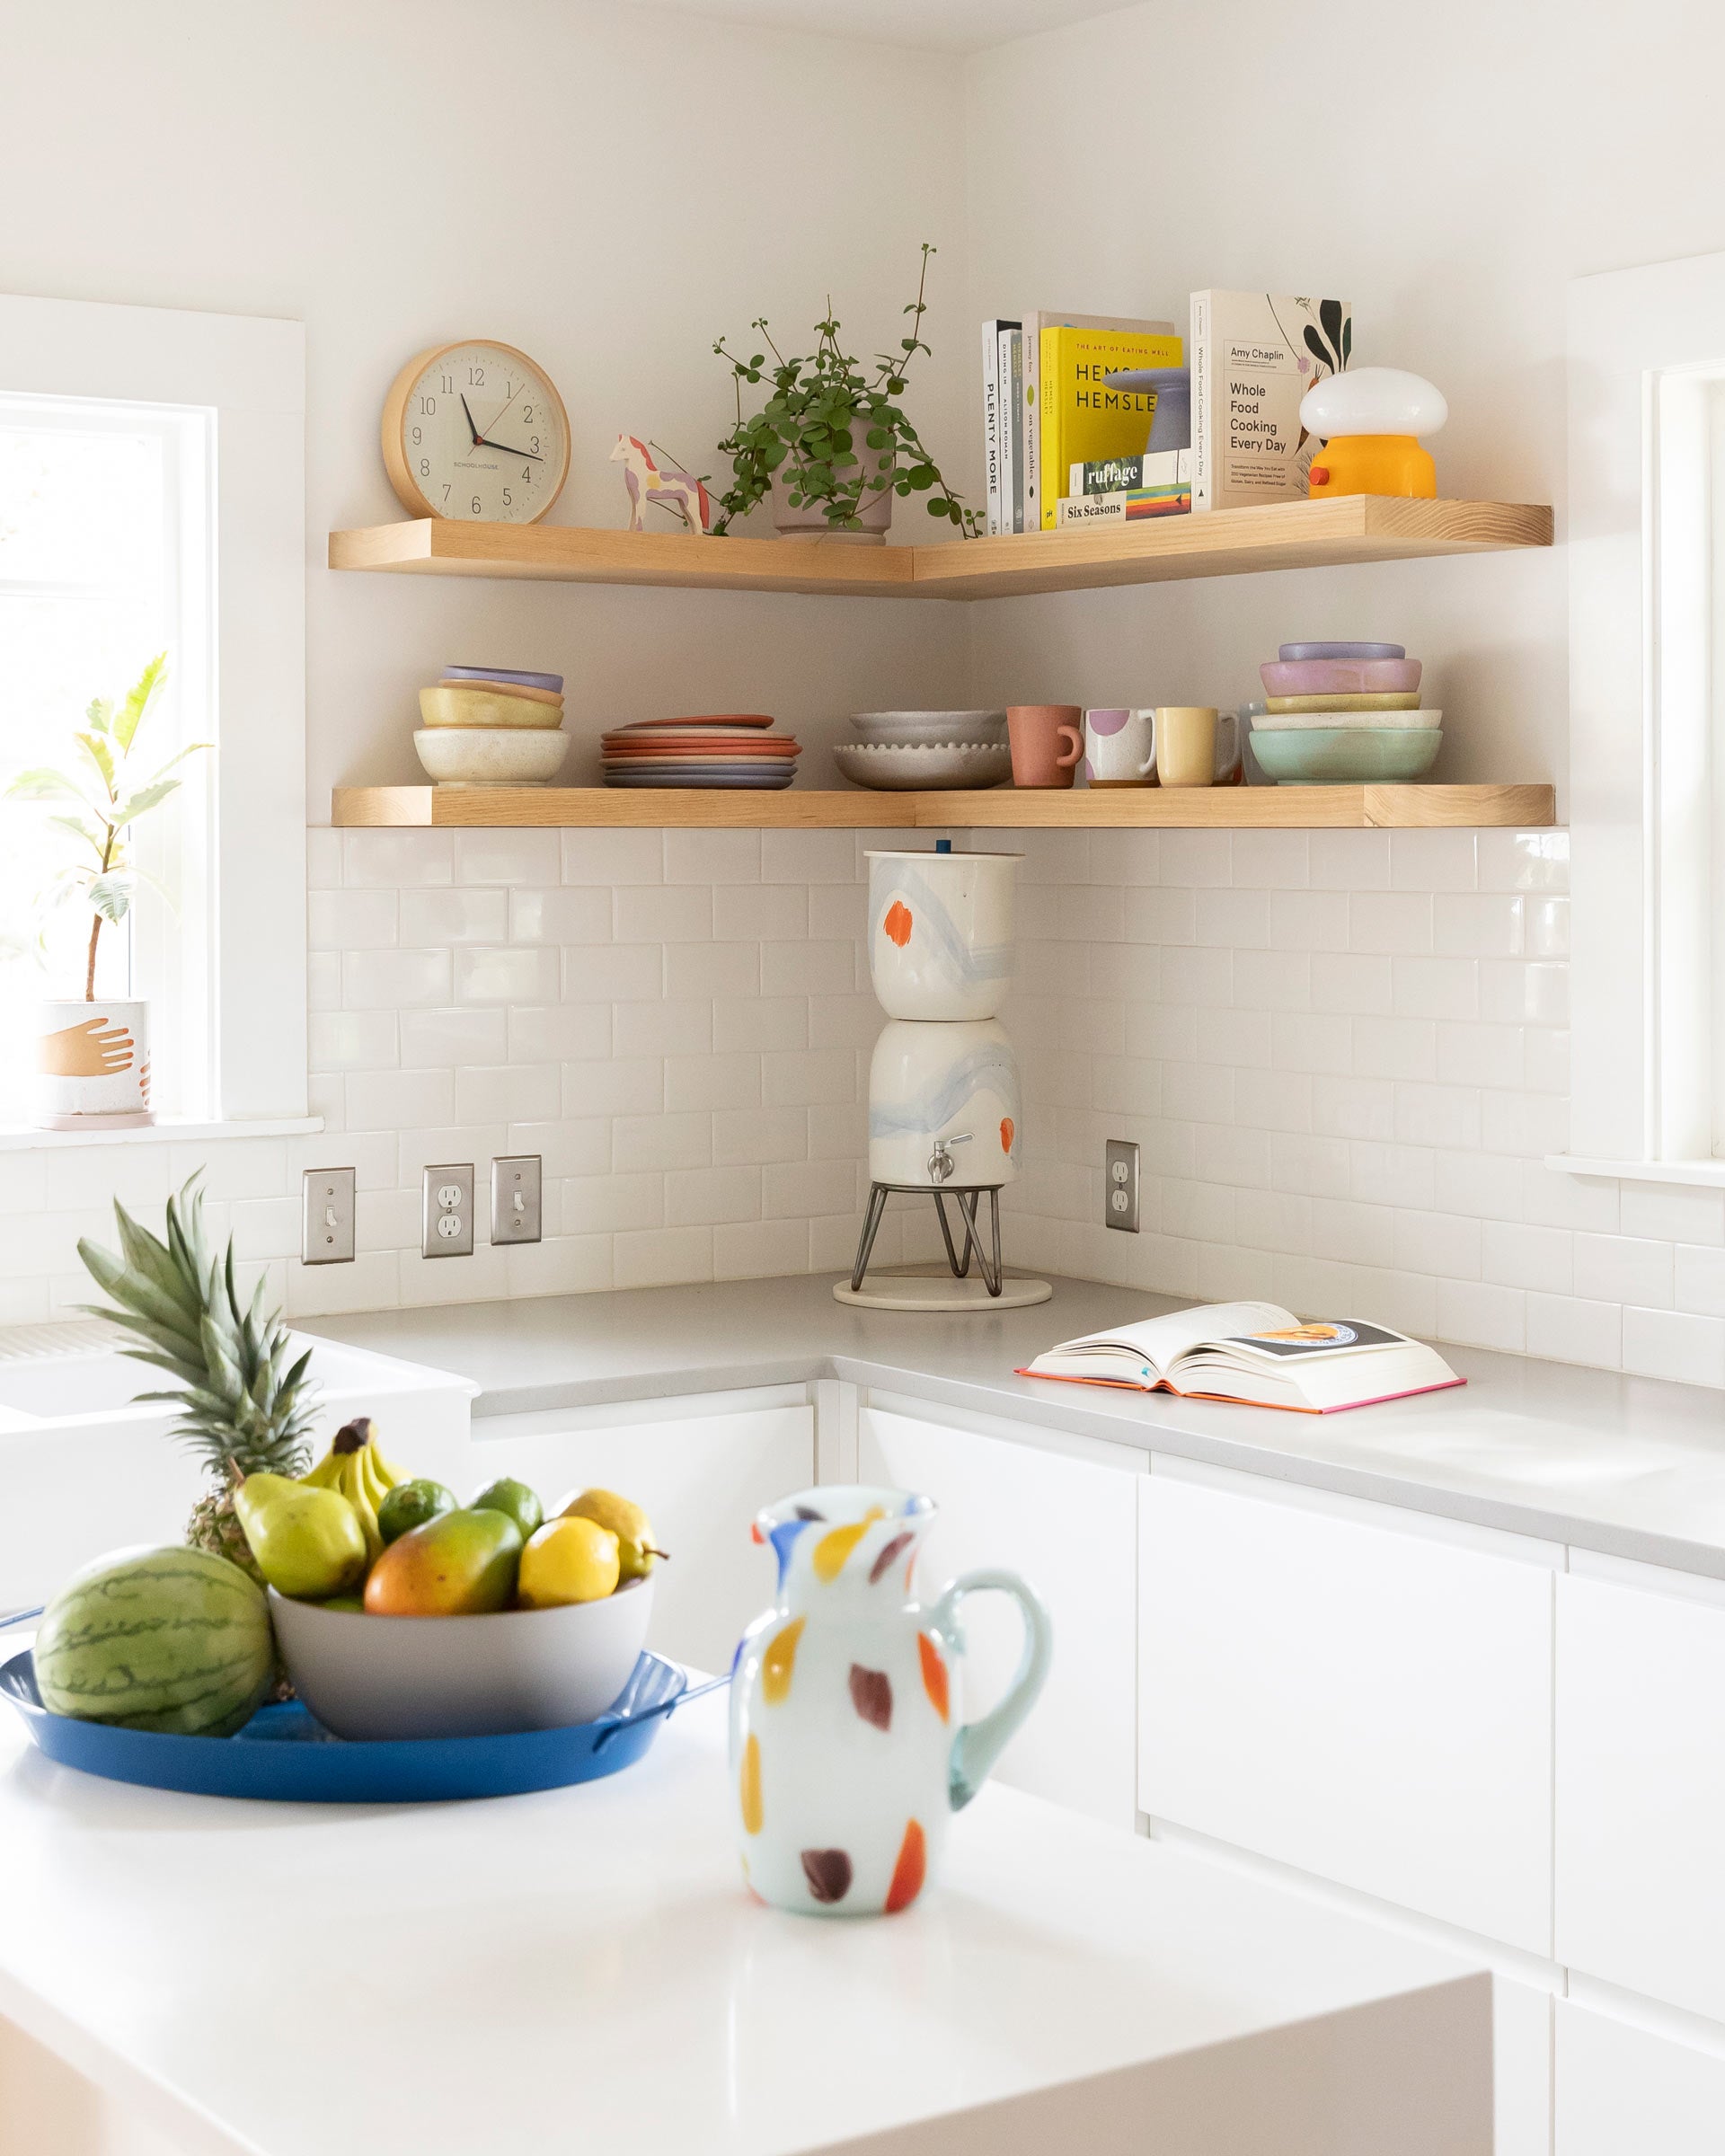 Open shelving in a kitchen with a yellow mushroom shaped table lamp.